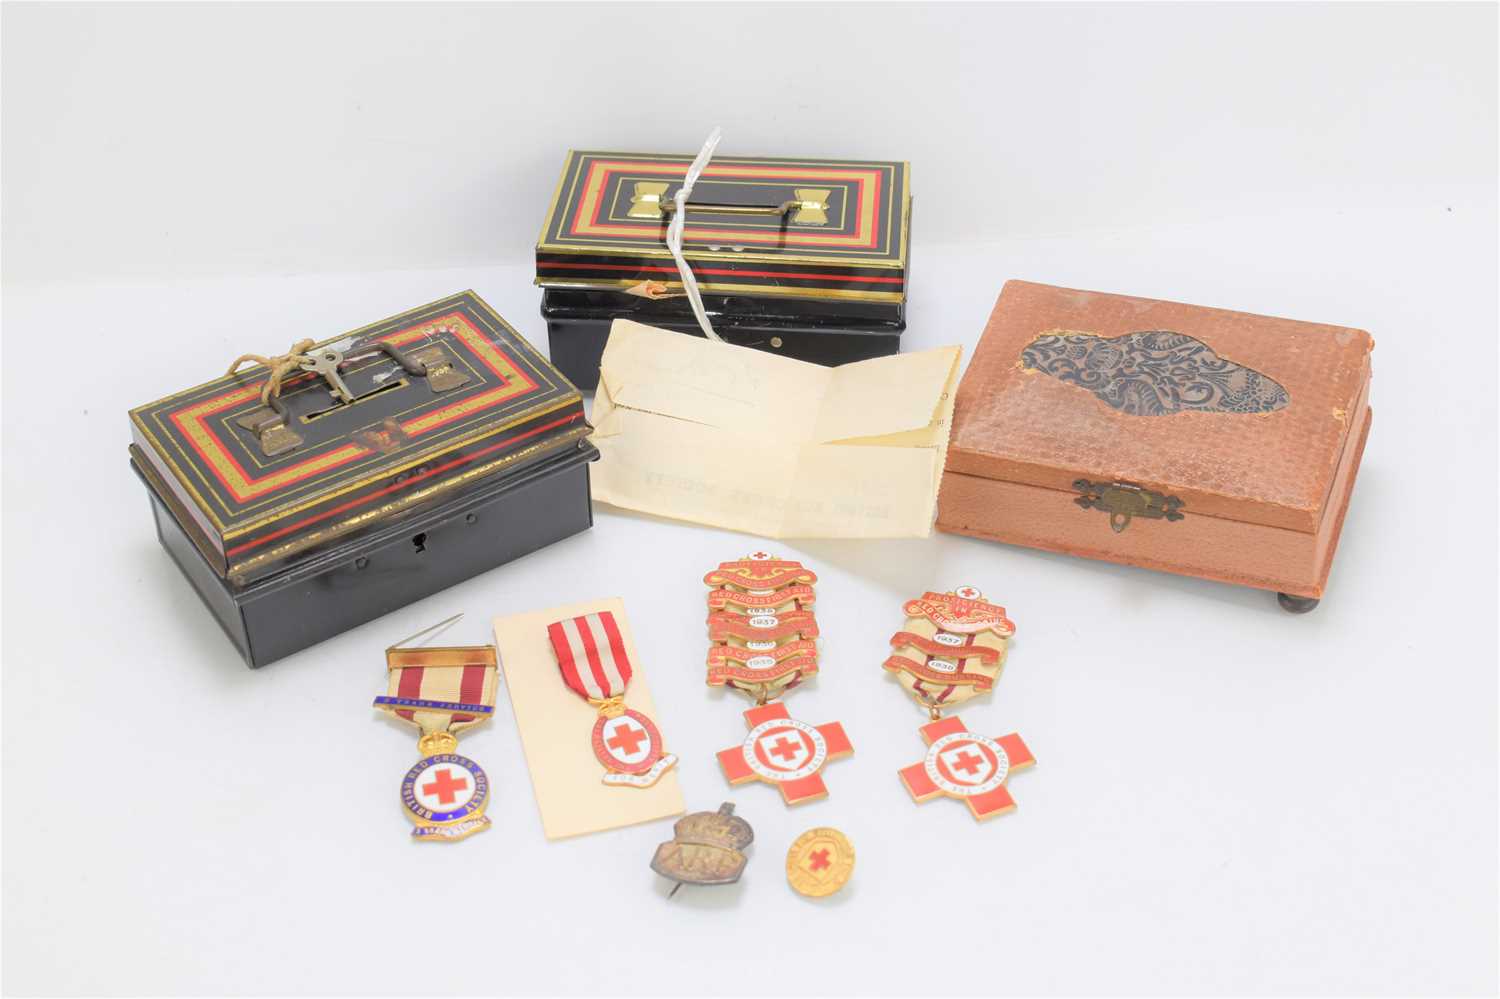 A group of 1930s British Red Cross proficiency medals awarded to M. Squirrel, made by J.R Gaunt